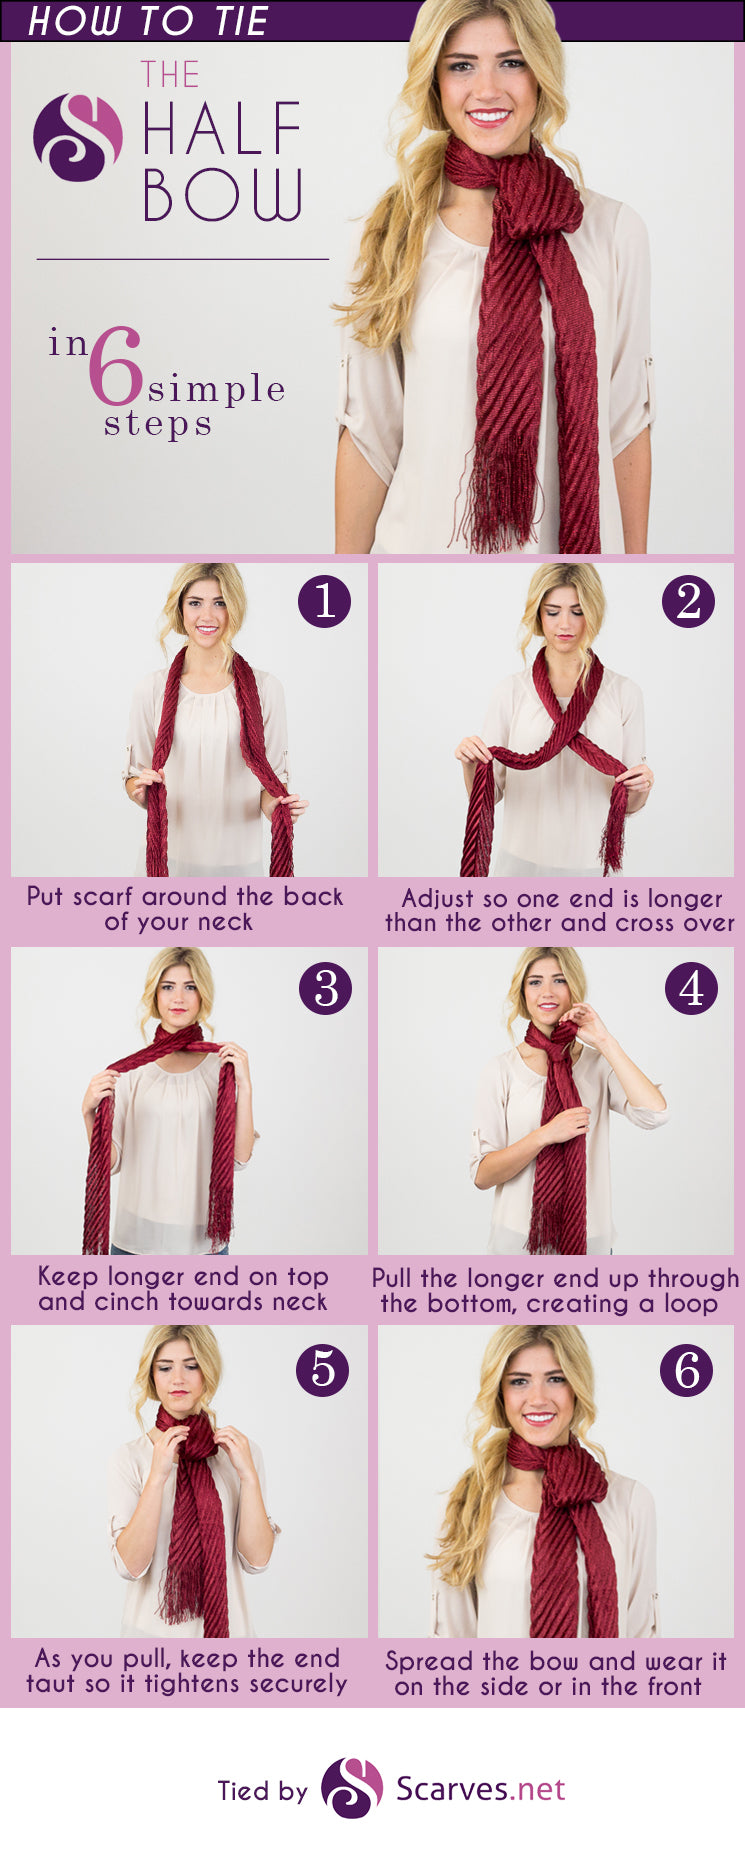 The Half Bow Knot in 6 simple steps